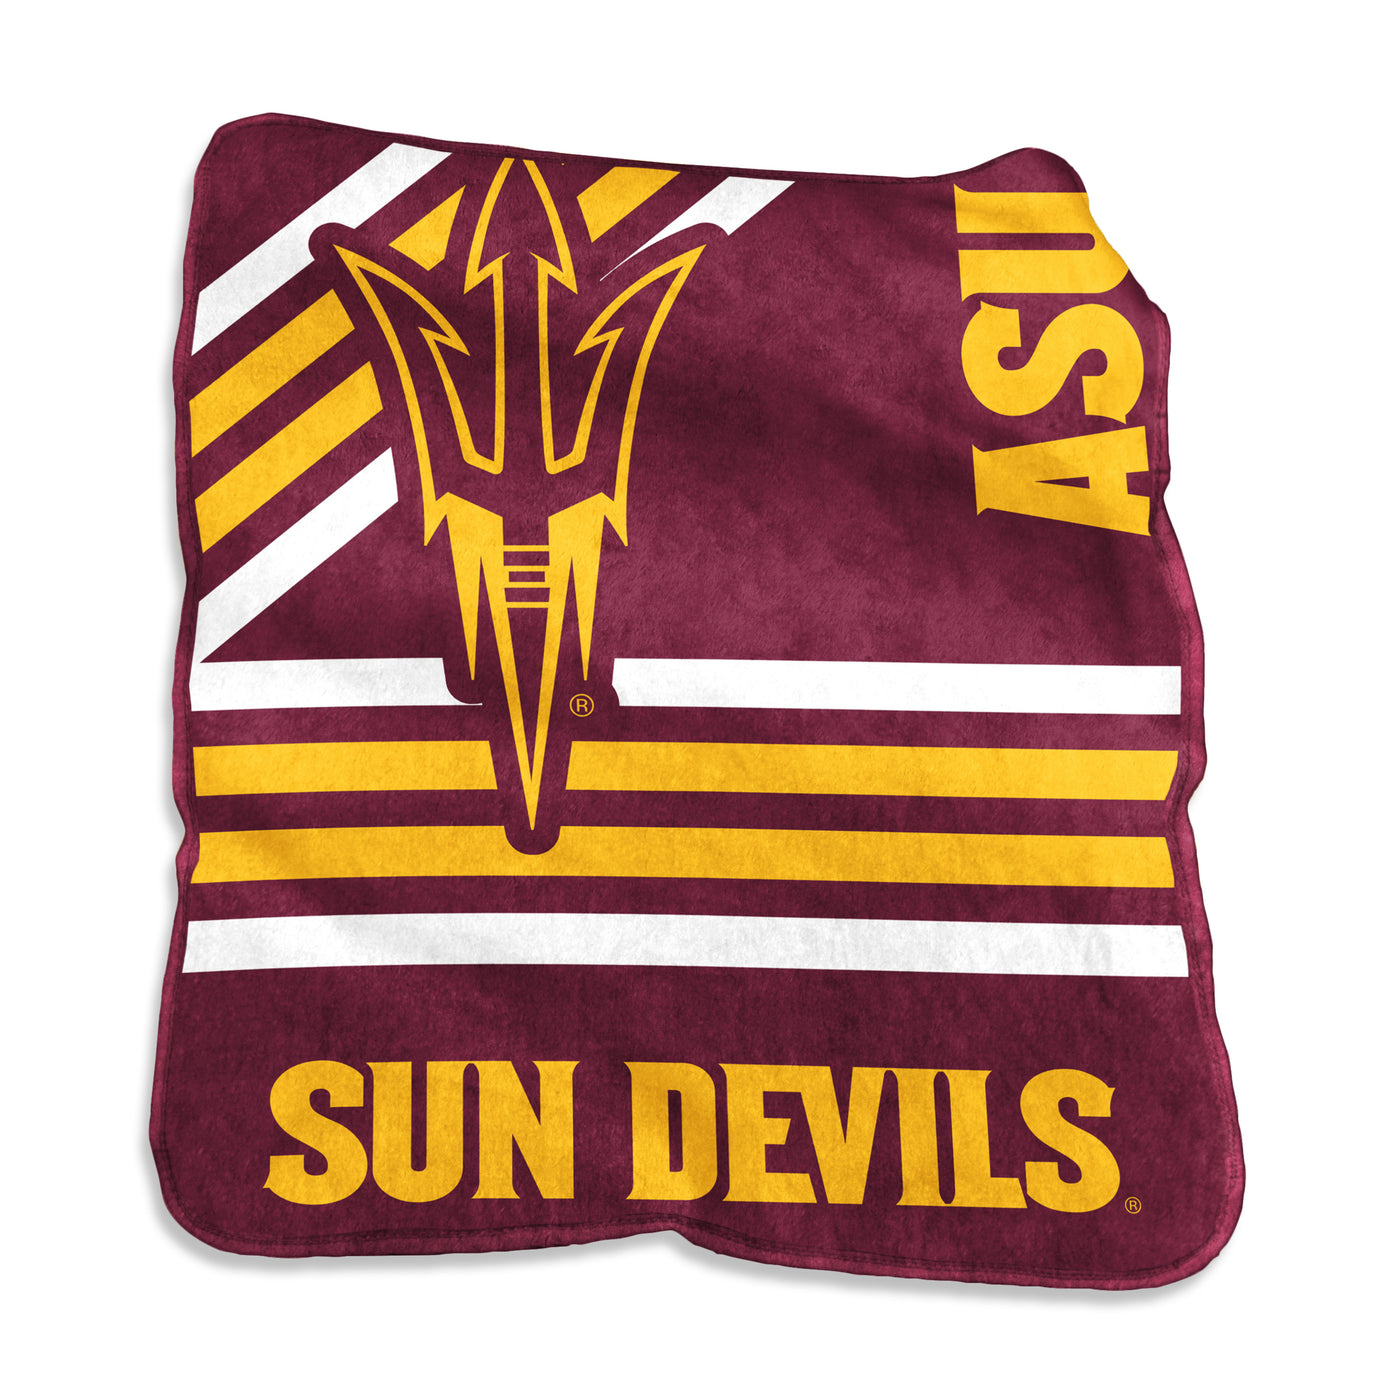 ASU maroon blanket with a pitchfork with gold outline, 'SunDevils' and 'ASU' lettering with white and gold stripes in the background